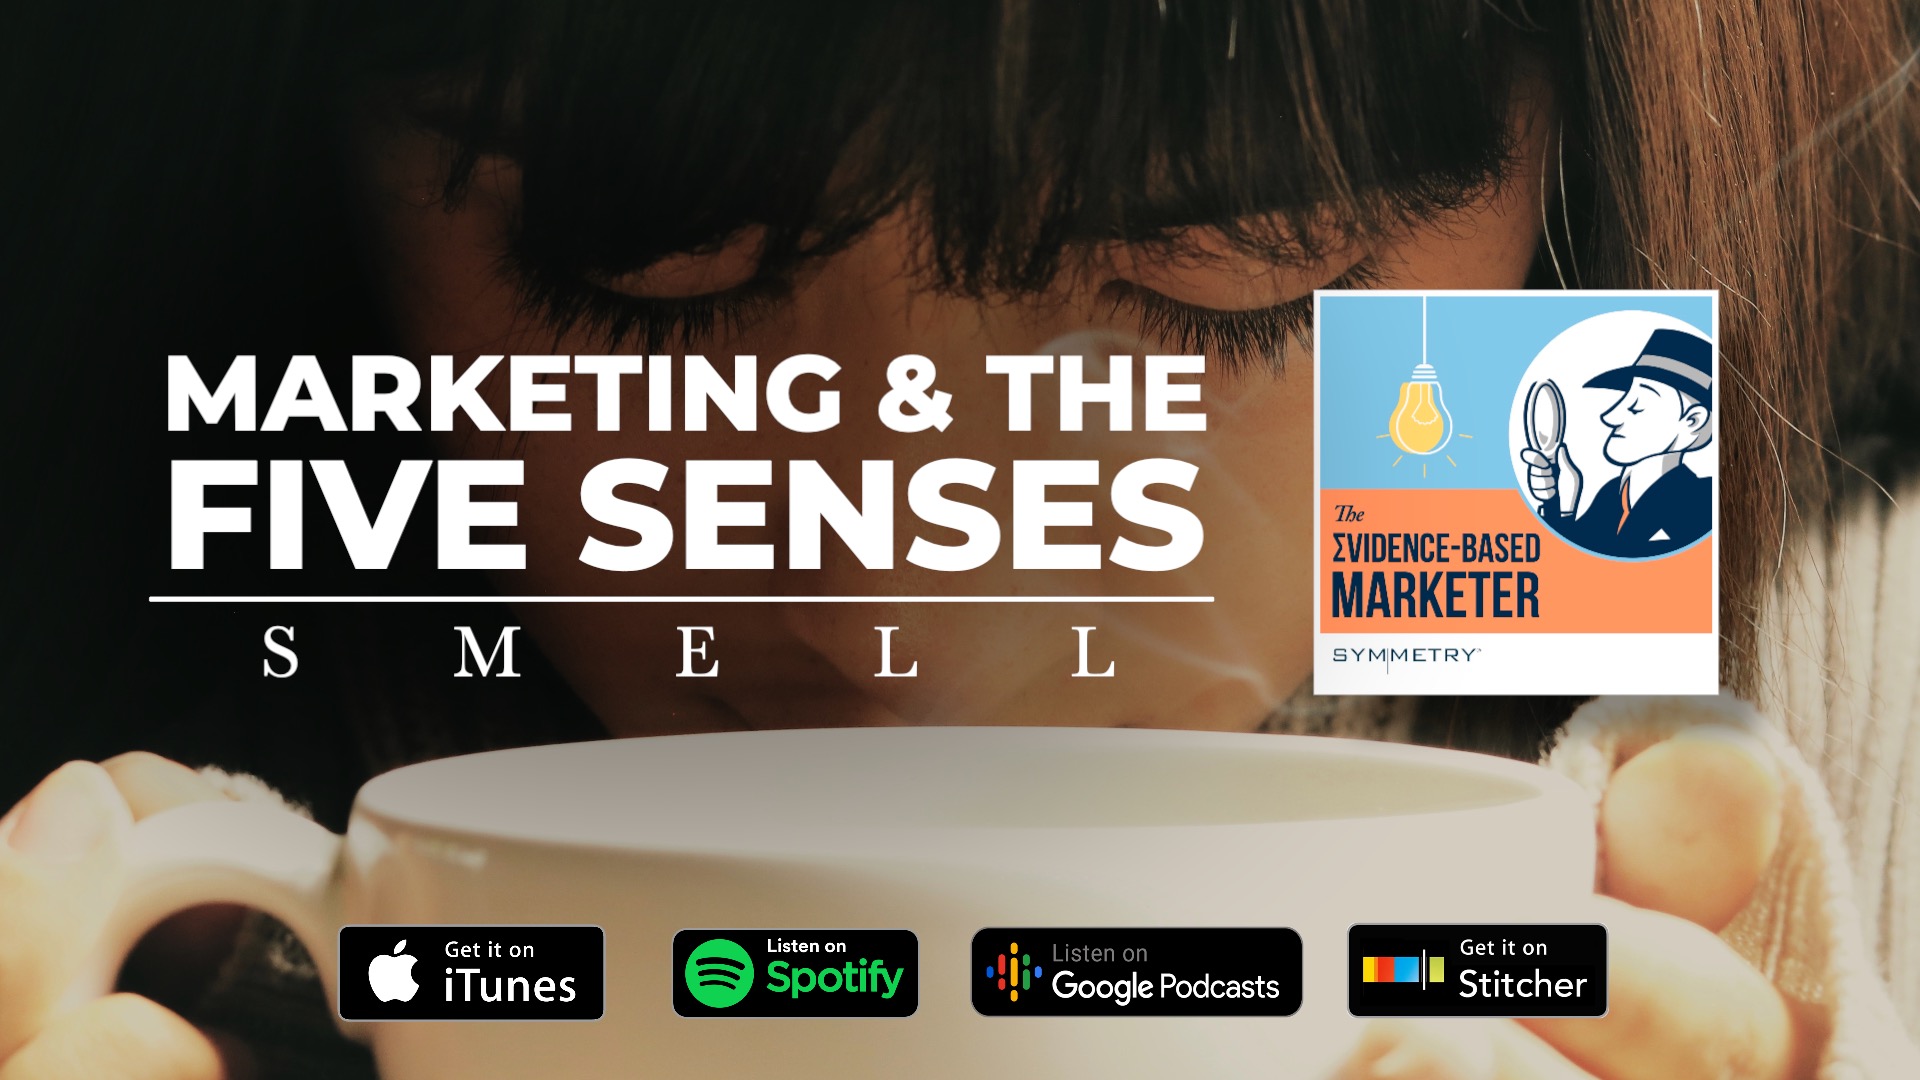 Marketing the Five Senses - Smell